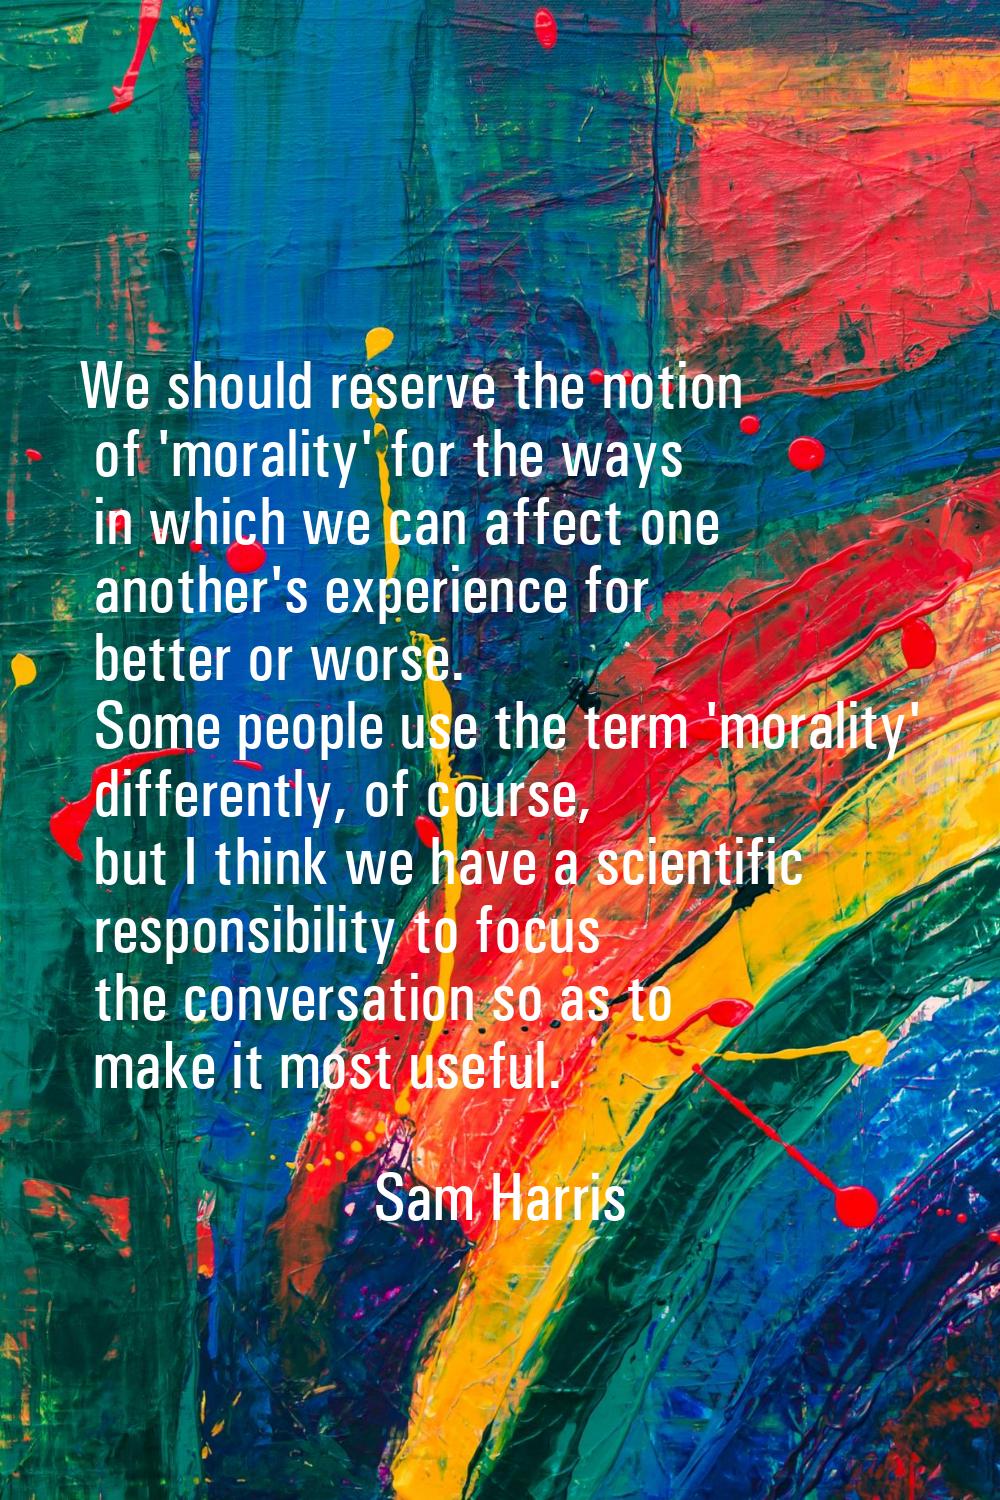 We should reserve the notion of 'morality' for the ways in which we can affect one another's experi